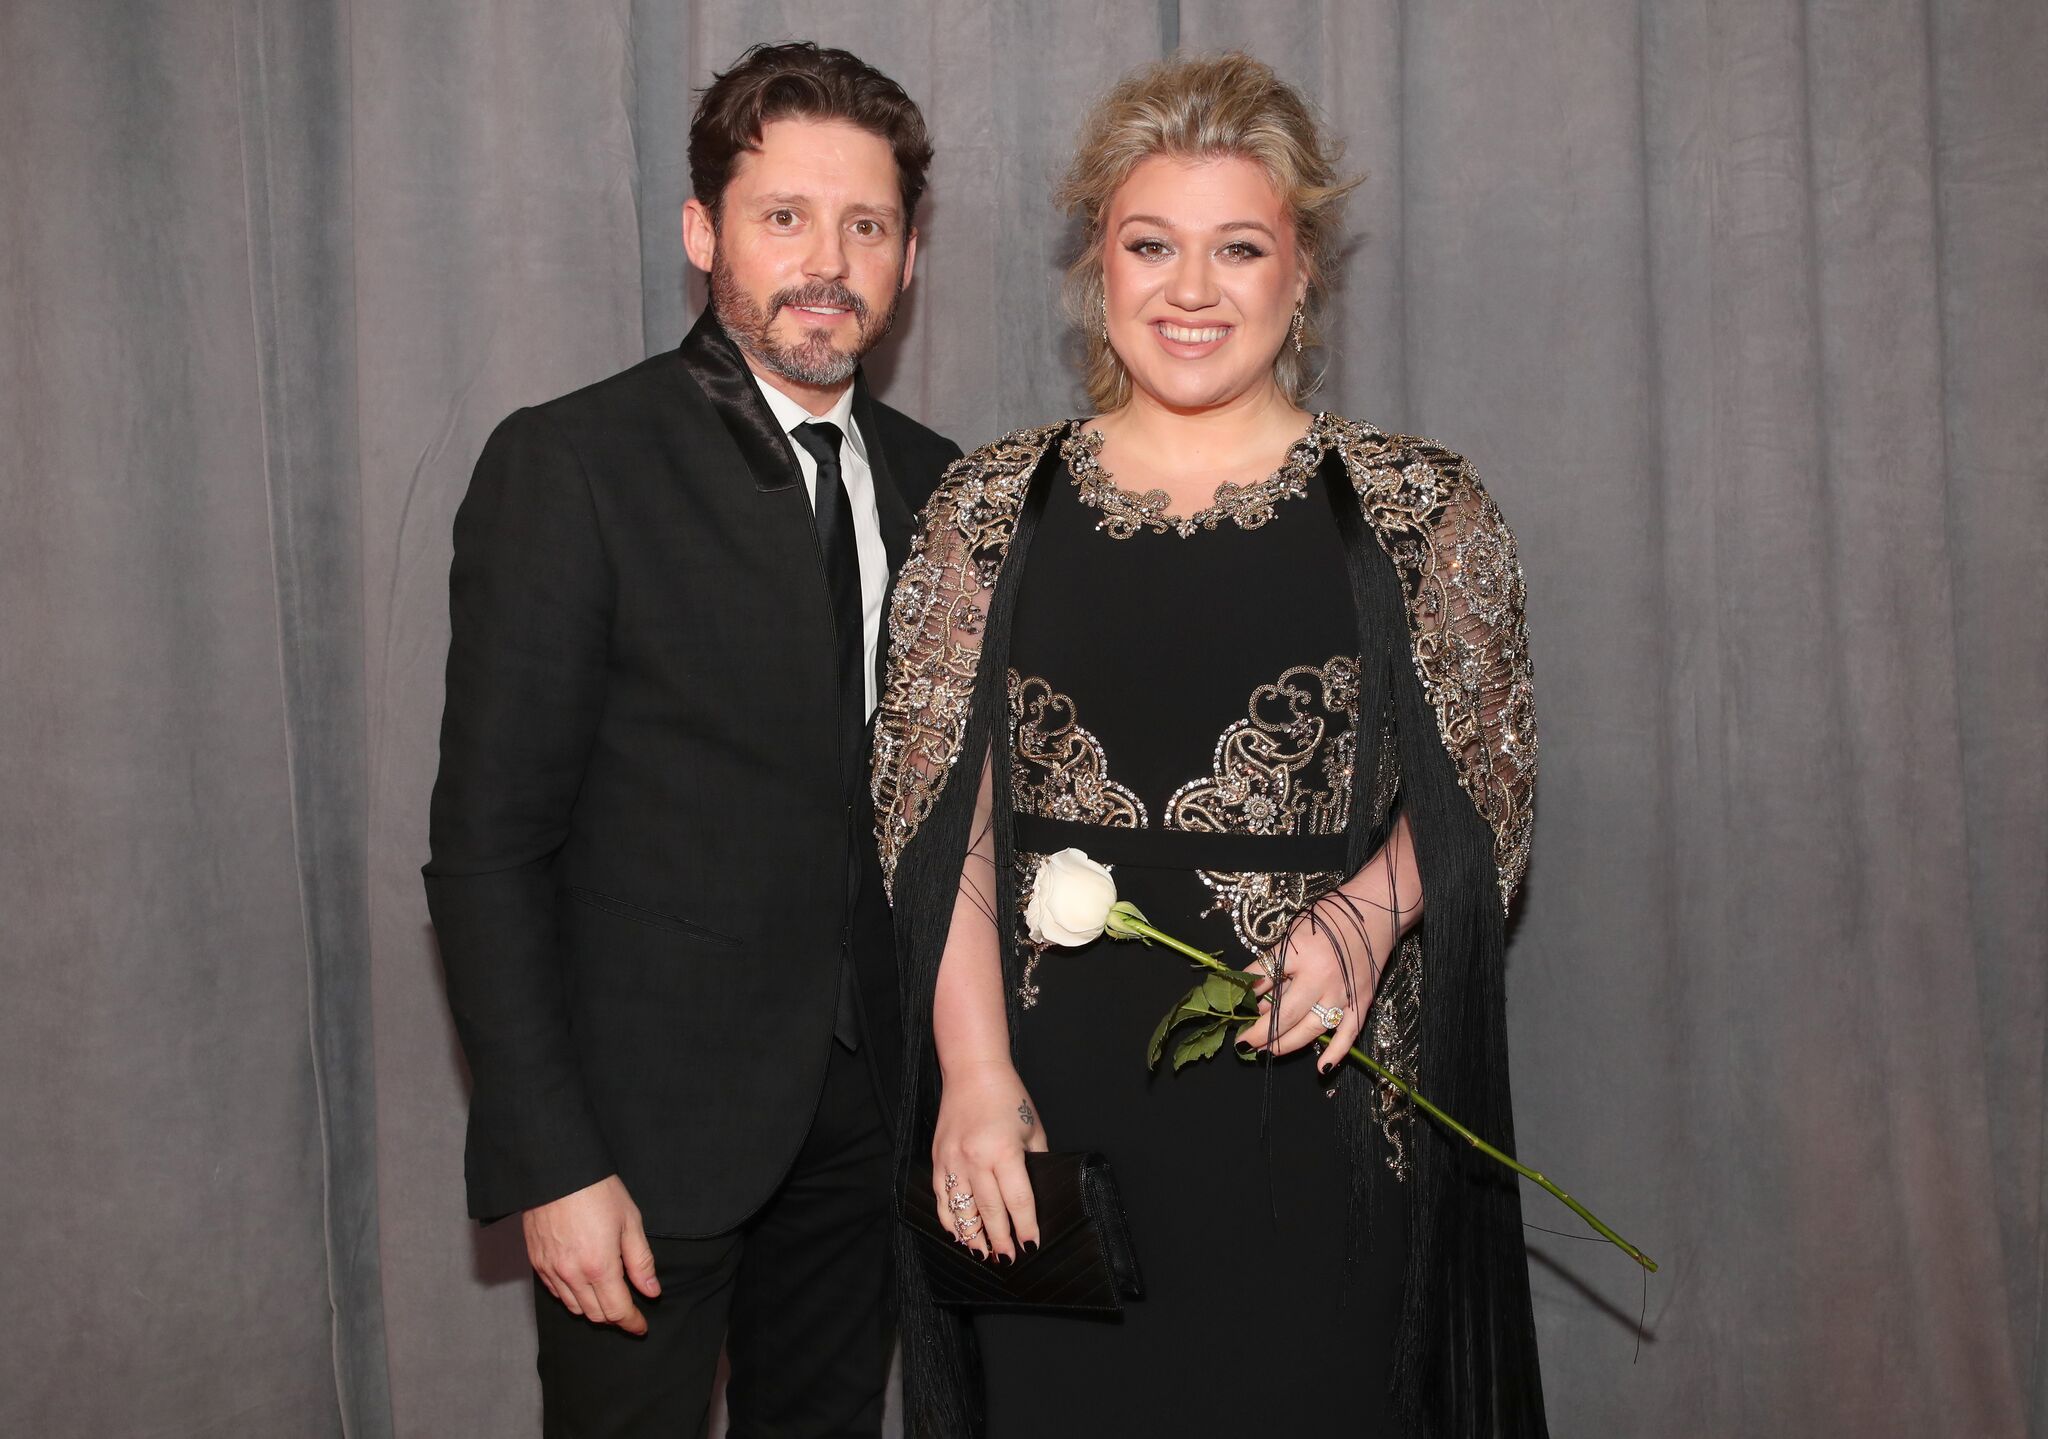 Brandon Blackstock and wife Kelly Clarkson at the 60th Annual GRAMMY Awards at Madison Square Garden on January 28, 2018 | Photo: Getty Images